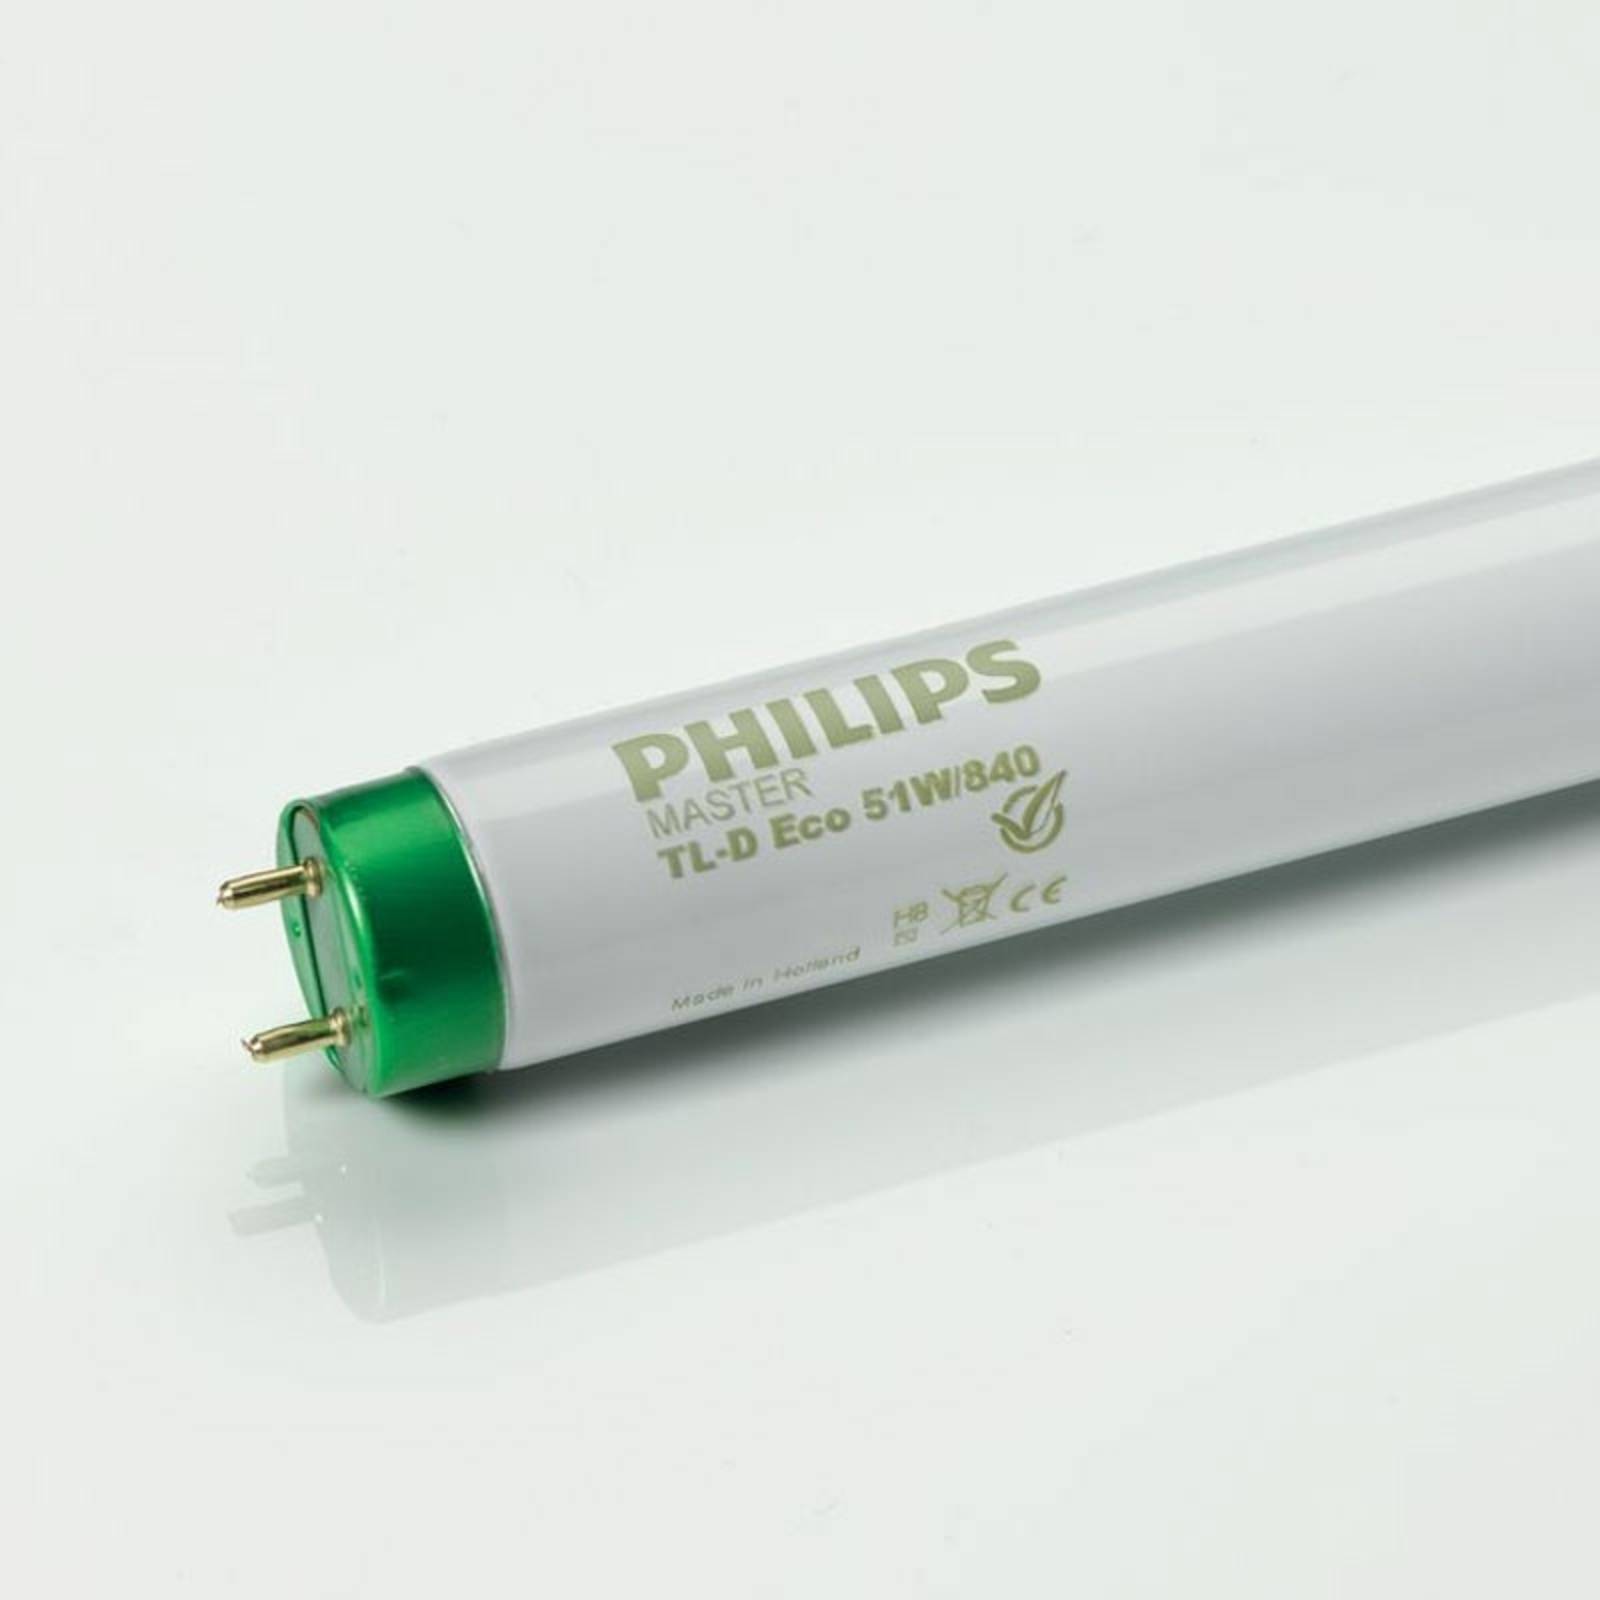 Philips Leuchtstoffröhre G13 T8 Master TL-D Eco 830 16W